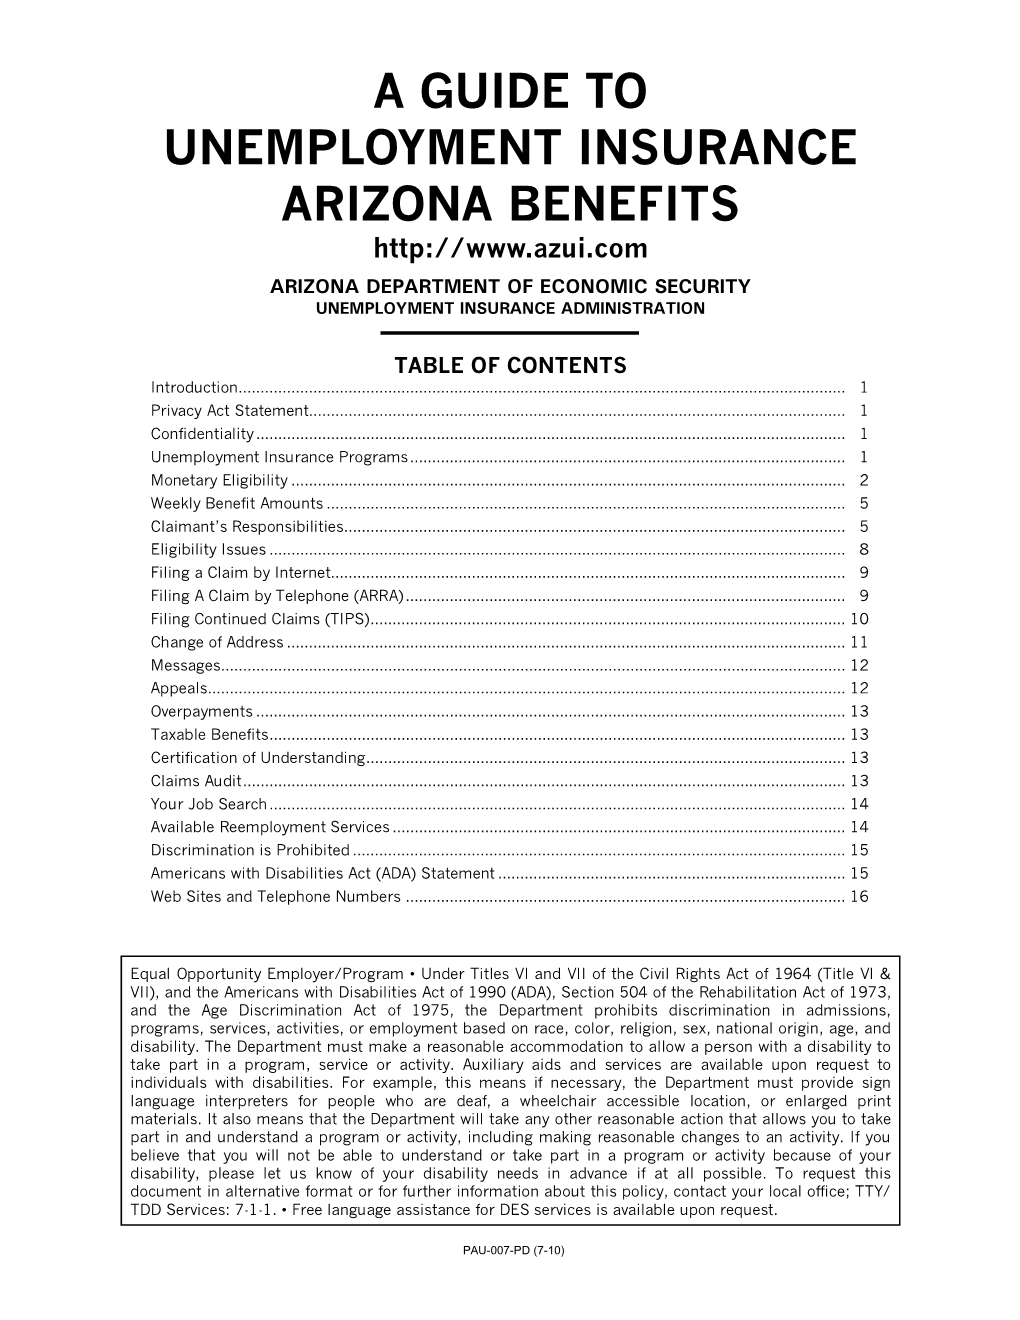 A Guide to Unemployment Insurance Arizona Benefits Arizona Department of Economic Security Unemployment Insurance Administration